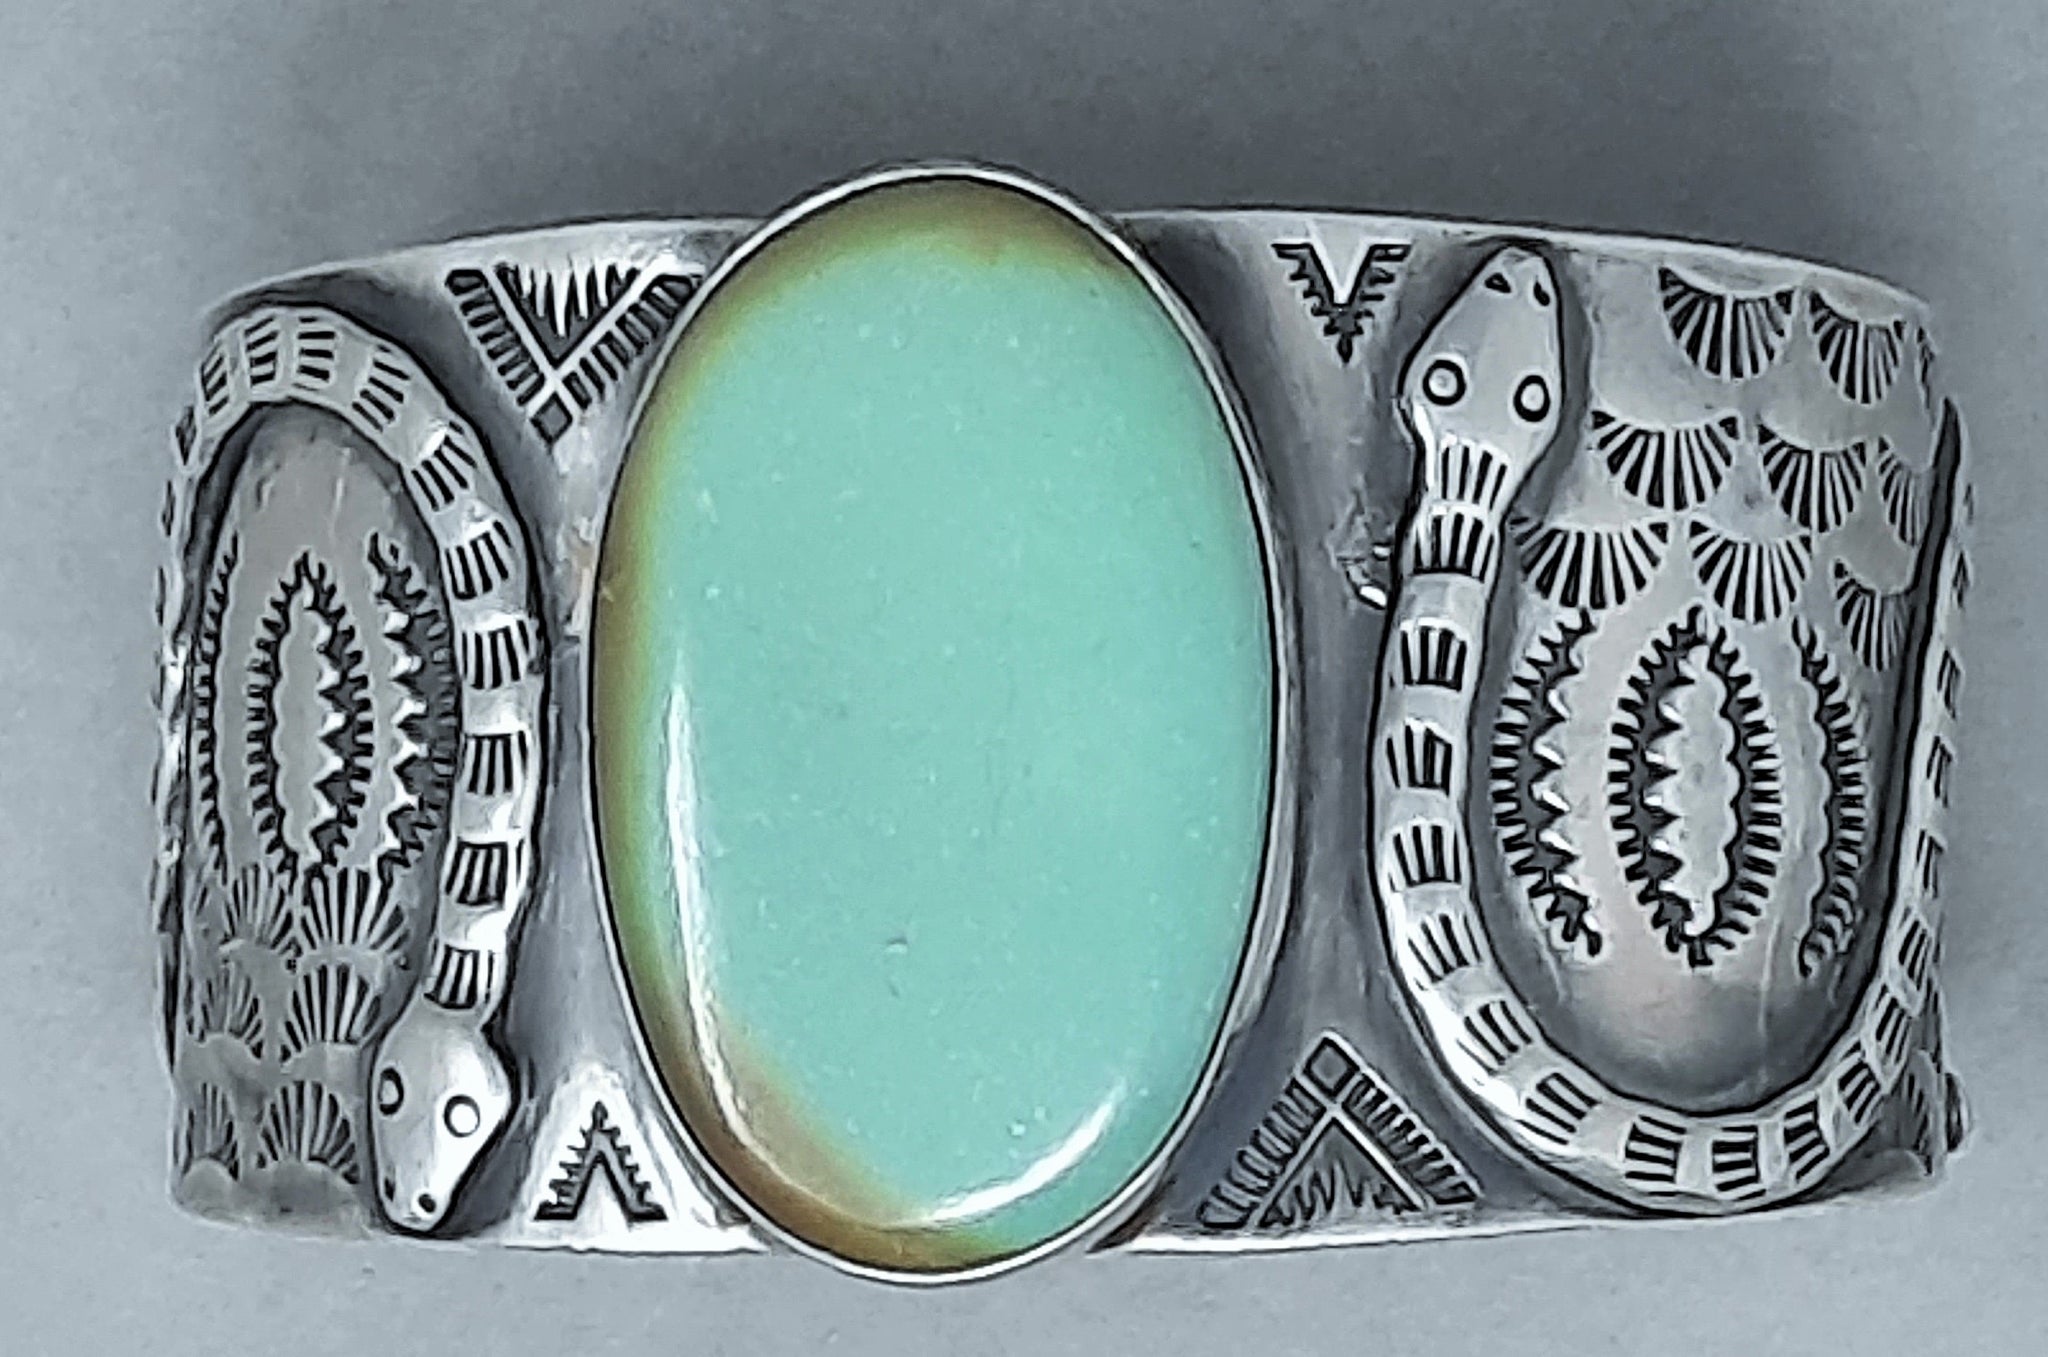 Navajo Silver and Turquoise cuff Bracelet By Verdy Jake